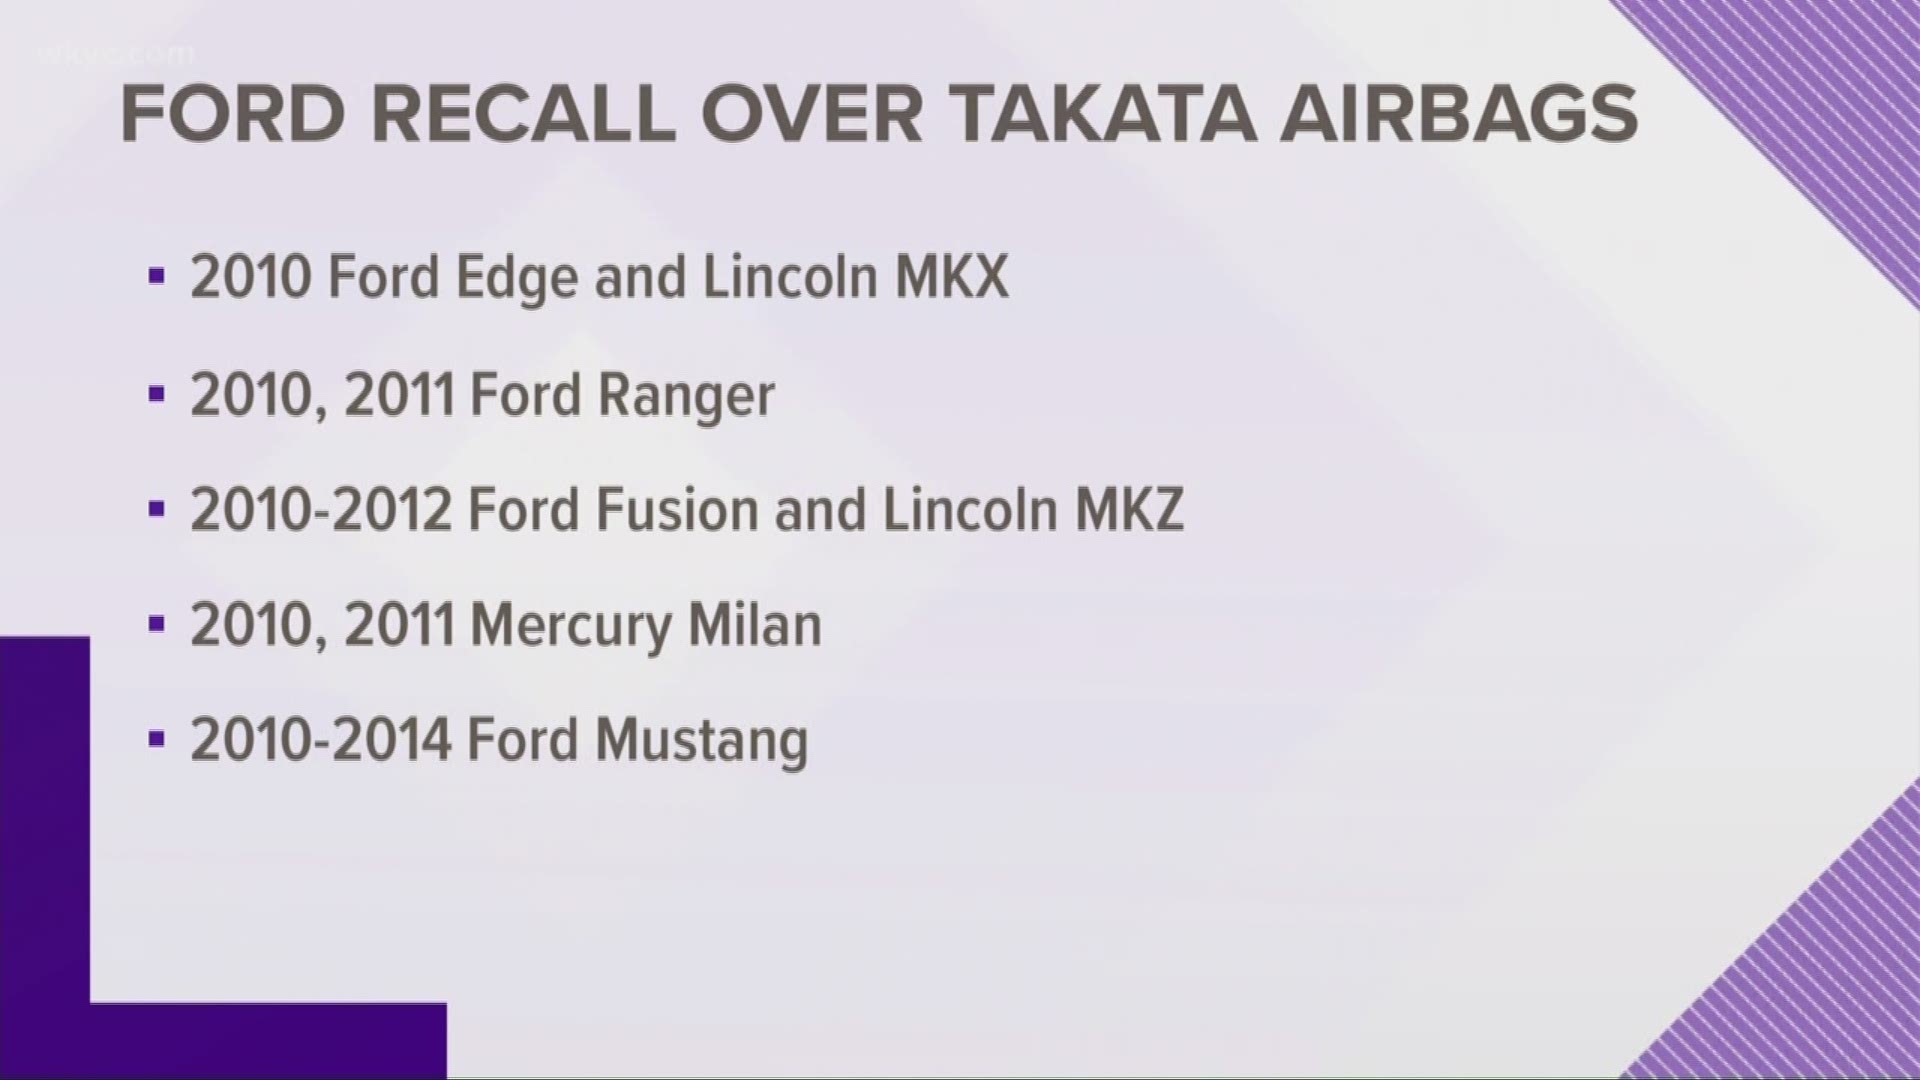 Ford recalls over 953,000 vehicles to replace Takata air bag inflators